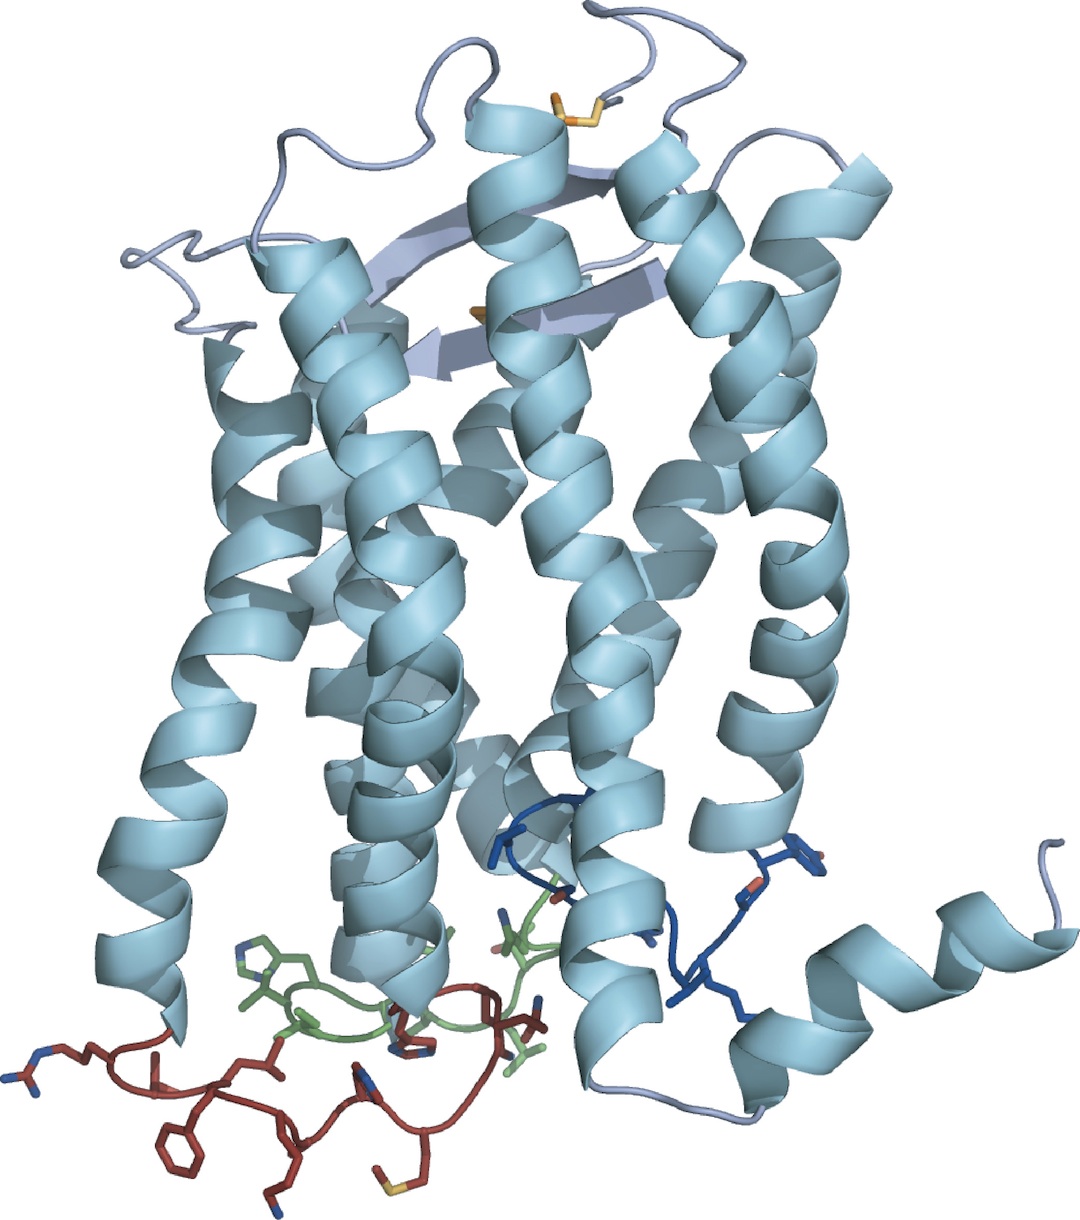 Protein 3d structure